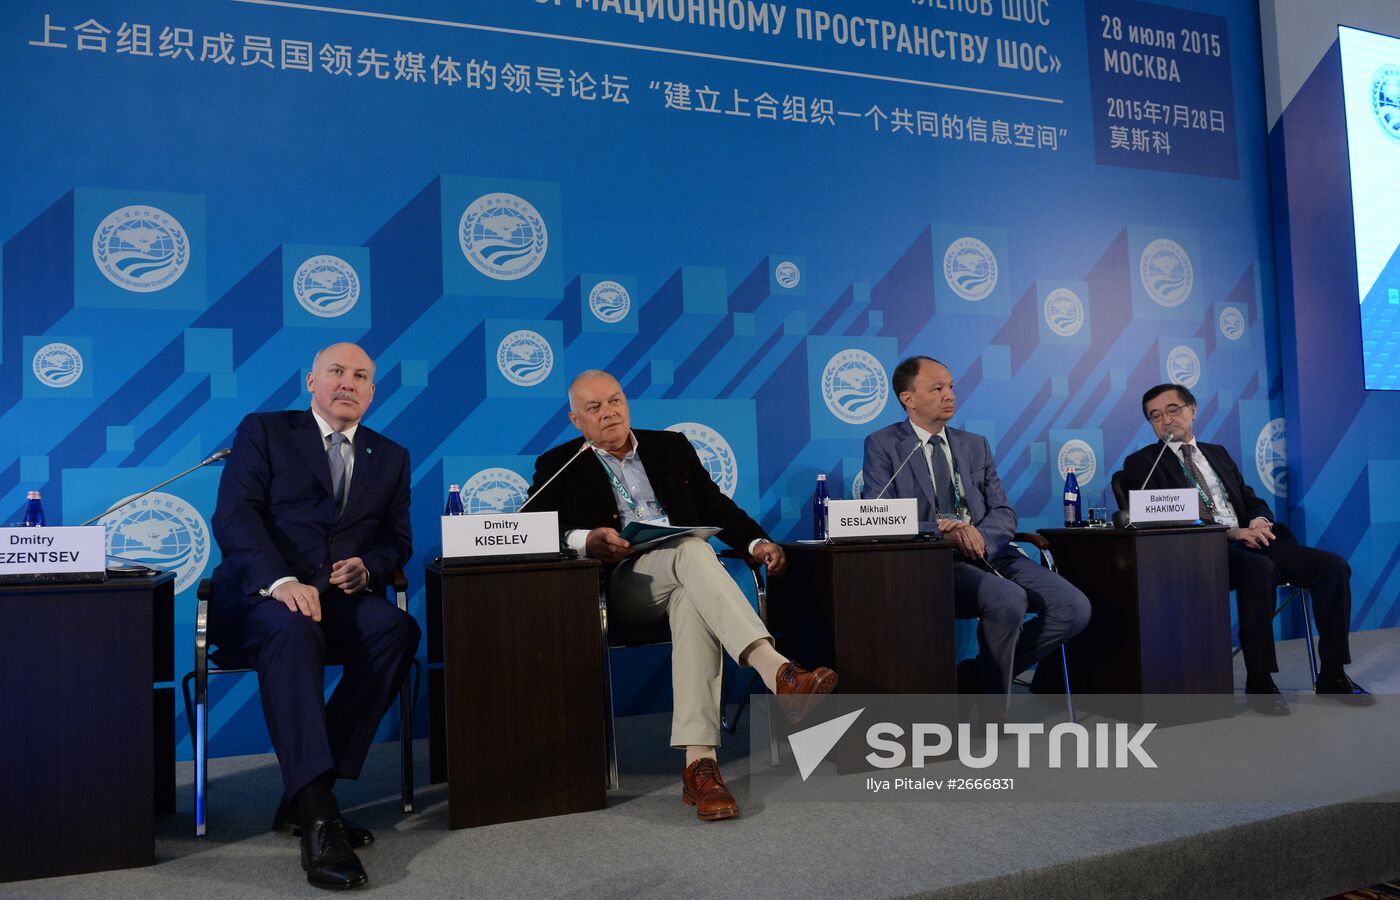 Forum of the Heads of the Leading SCO Media Outlets "Towards a Common SCO Information Space"